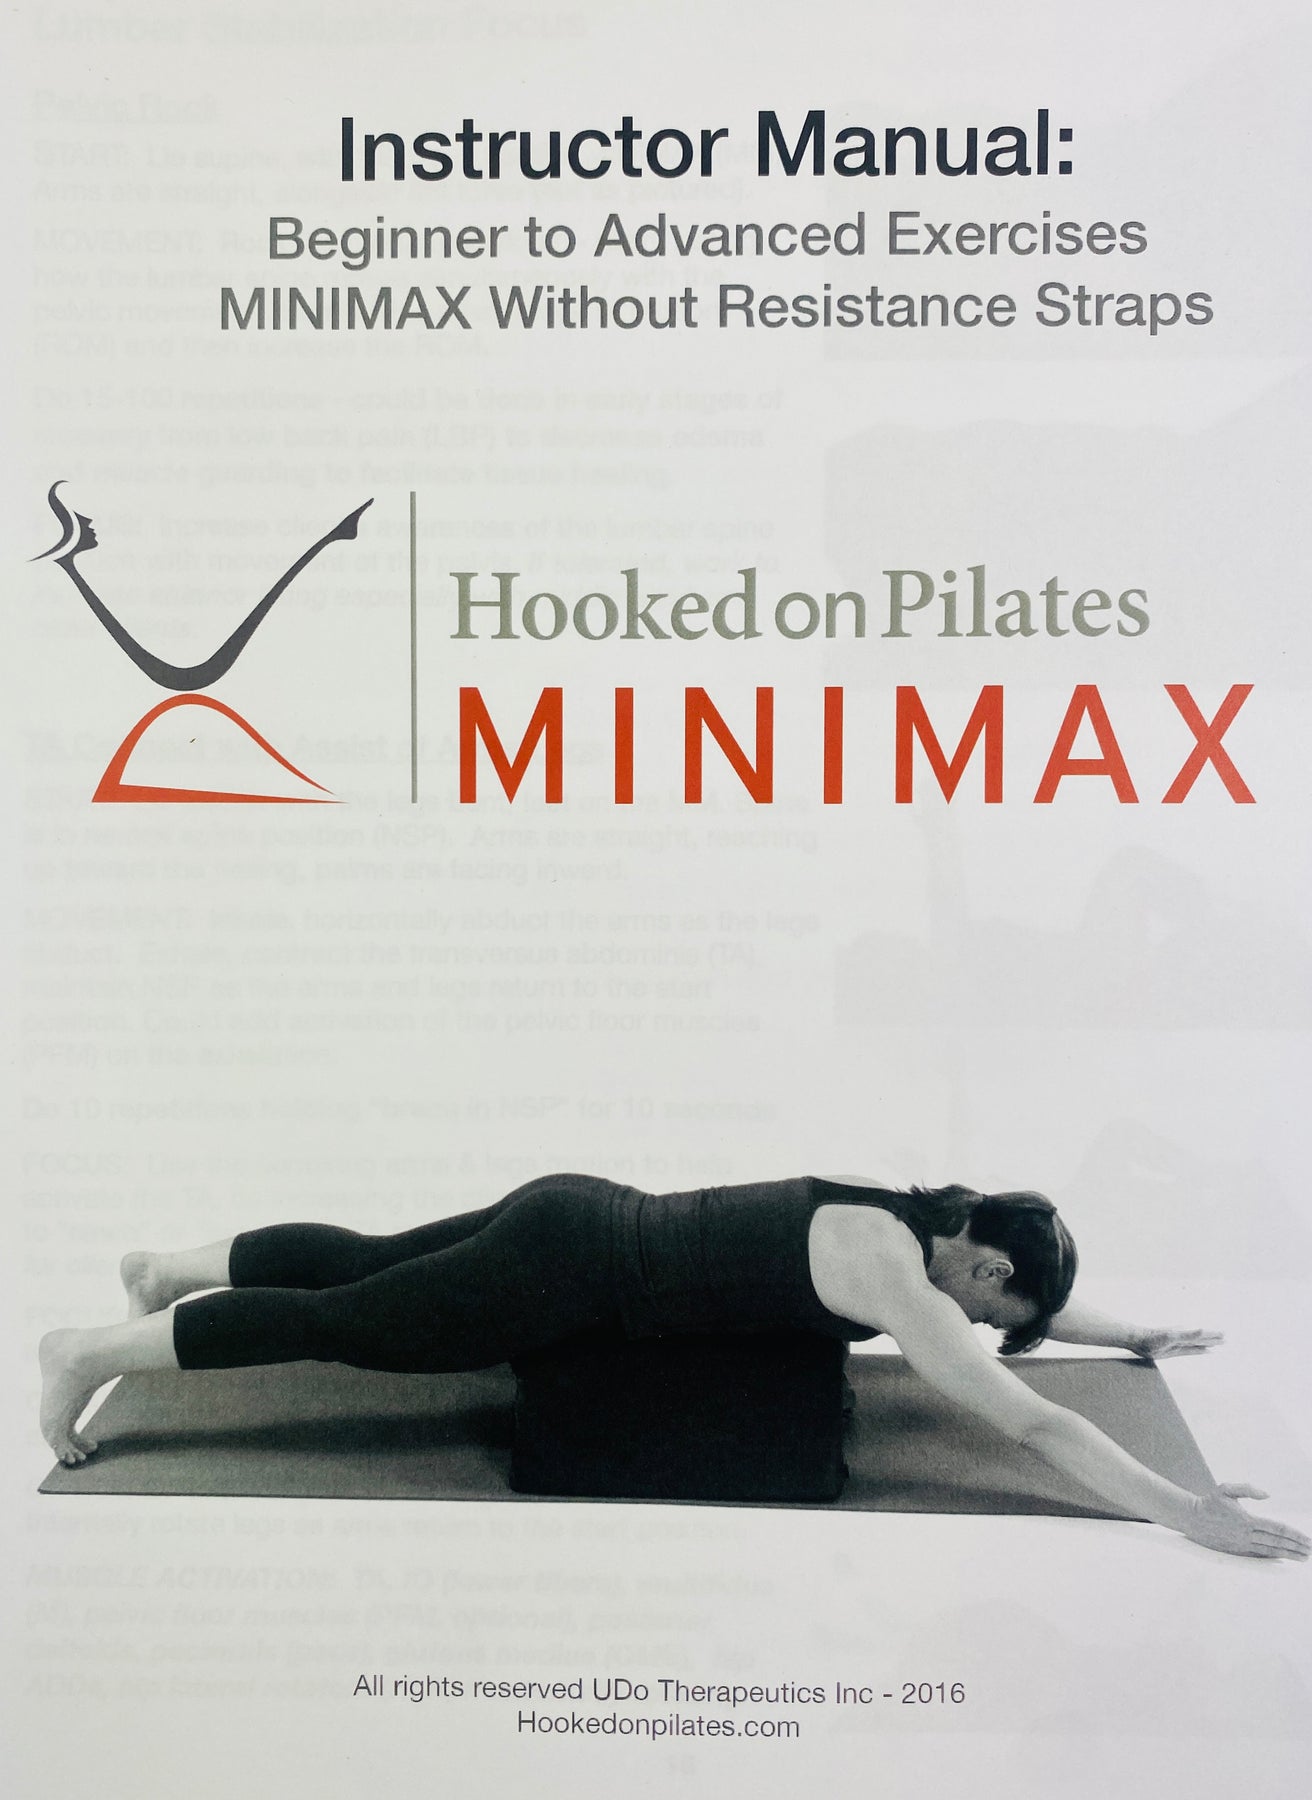 pilates arc barrel exercise manual, back exercises and more